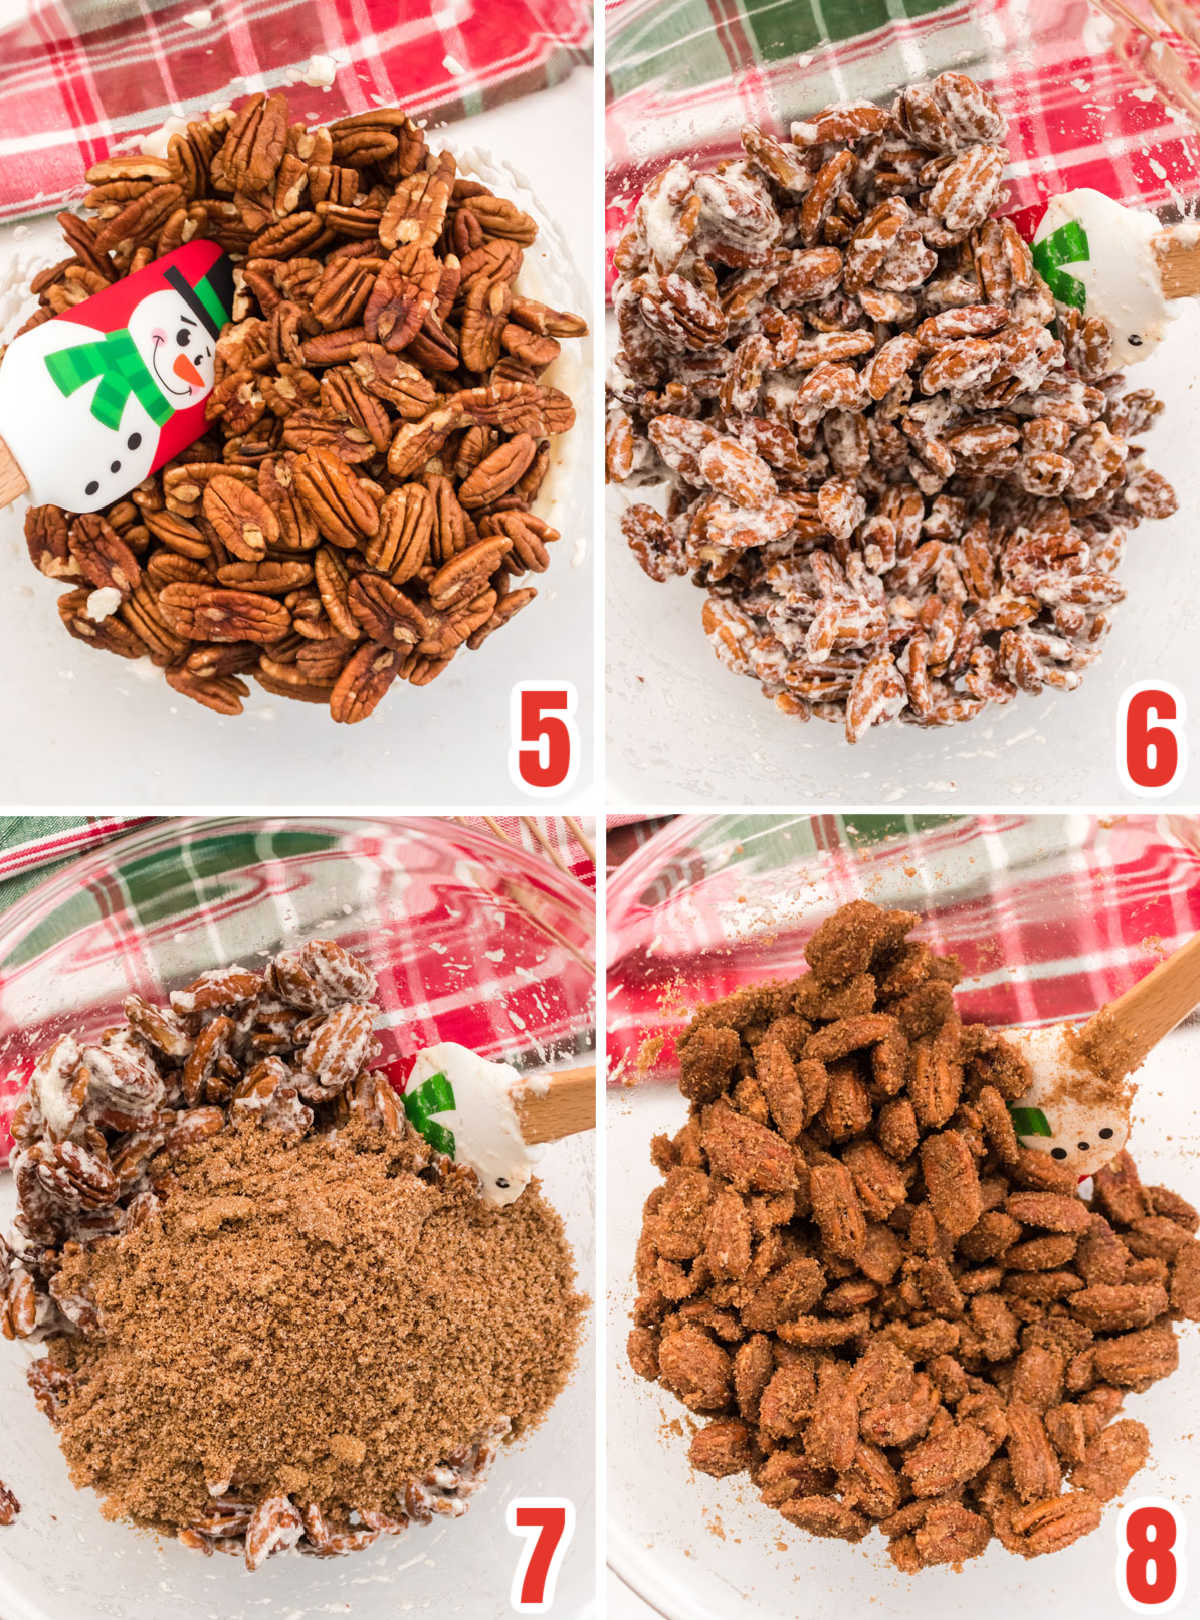 Collage image showing the steps for coating the pecans with the Cinnamon Sugar recipe.